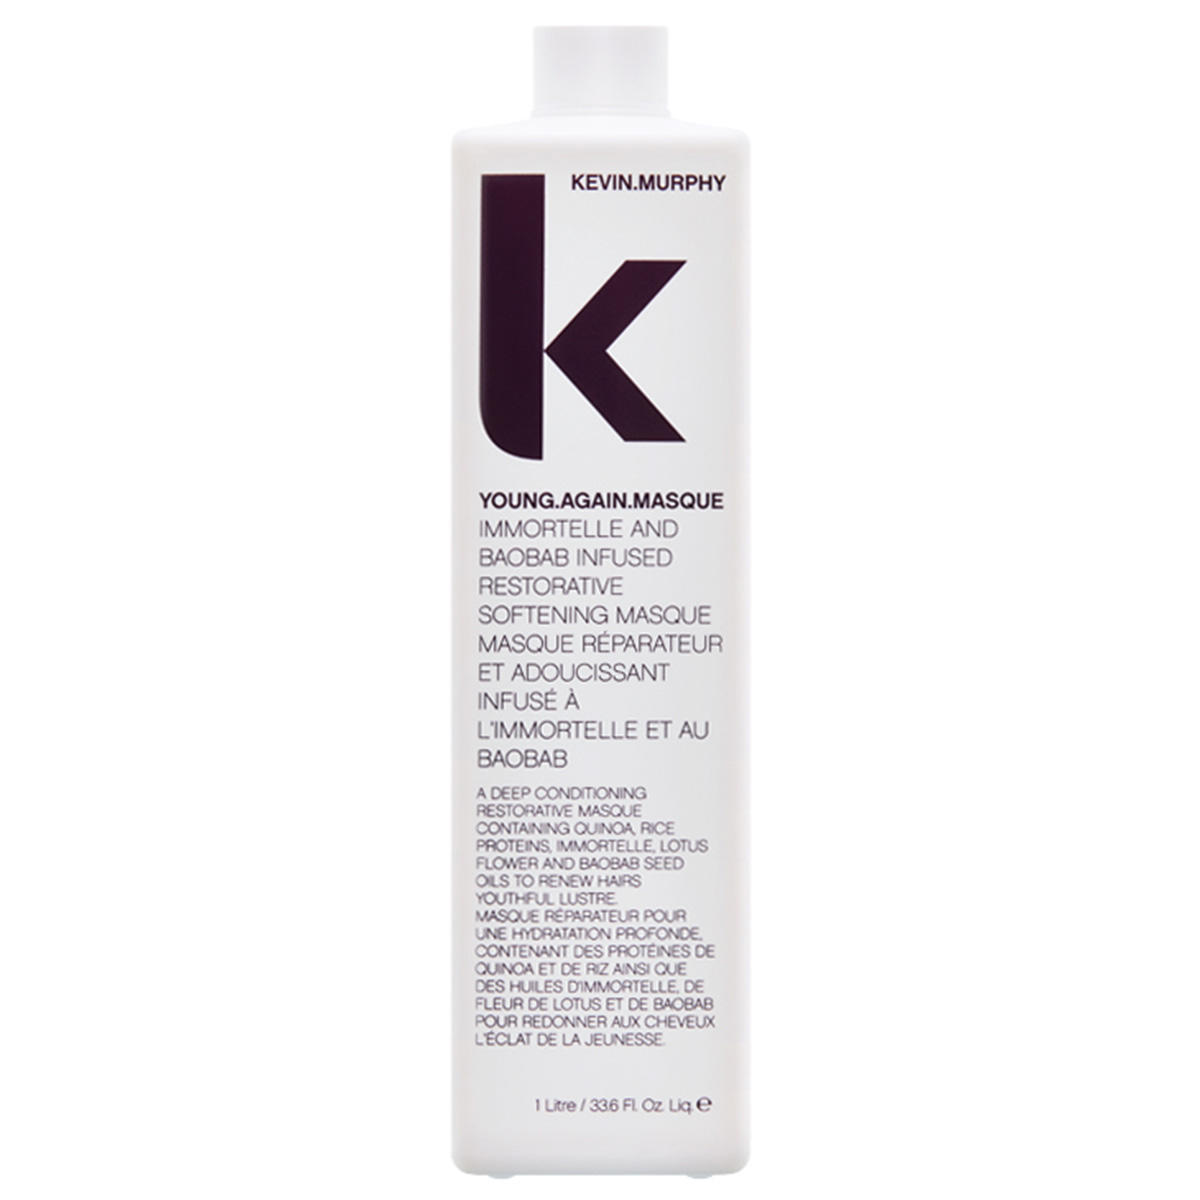 KEVIN.MURPHY YOUNG.AGAIN Masque 1 Liter